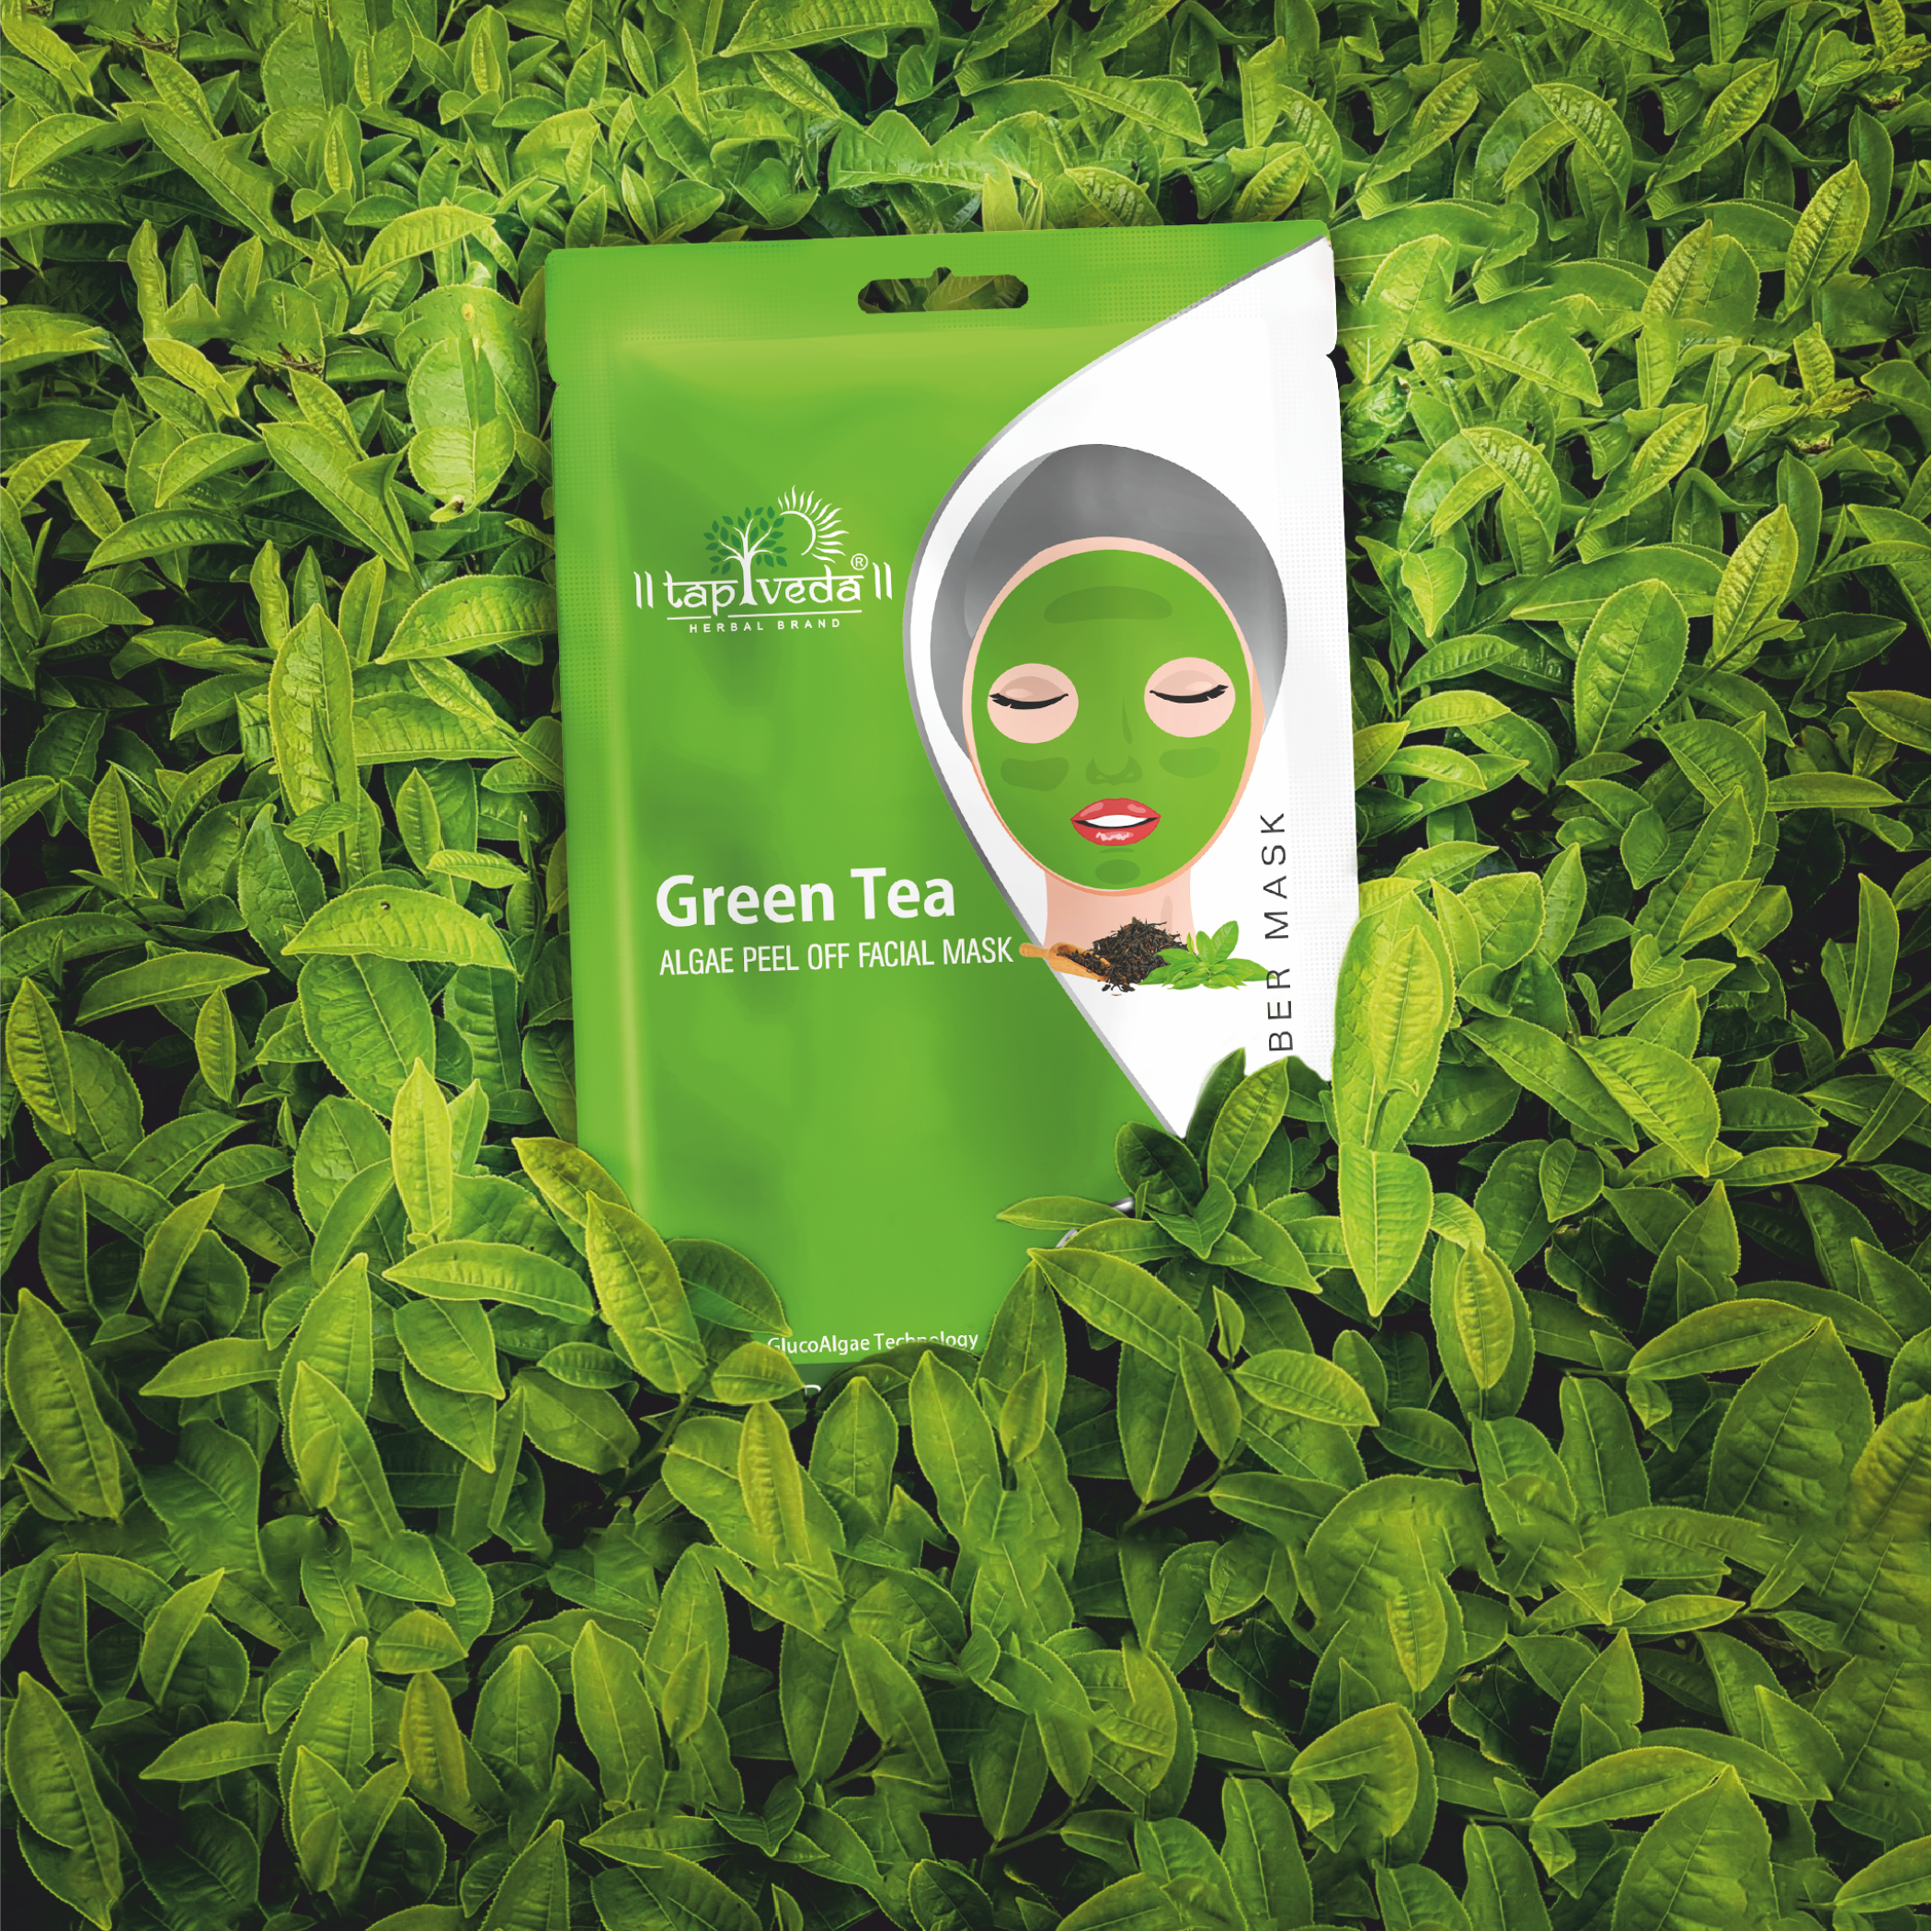 Tapveda Green Tea GlucoAlgae Peel Off Mask For Dead Skin Cell Removal & Youthful Glow (90g)